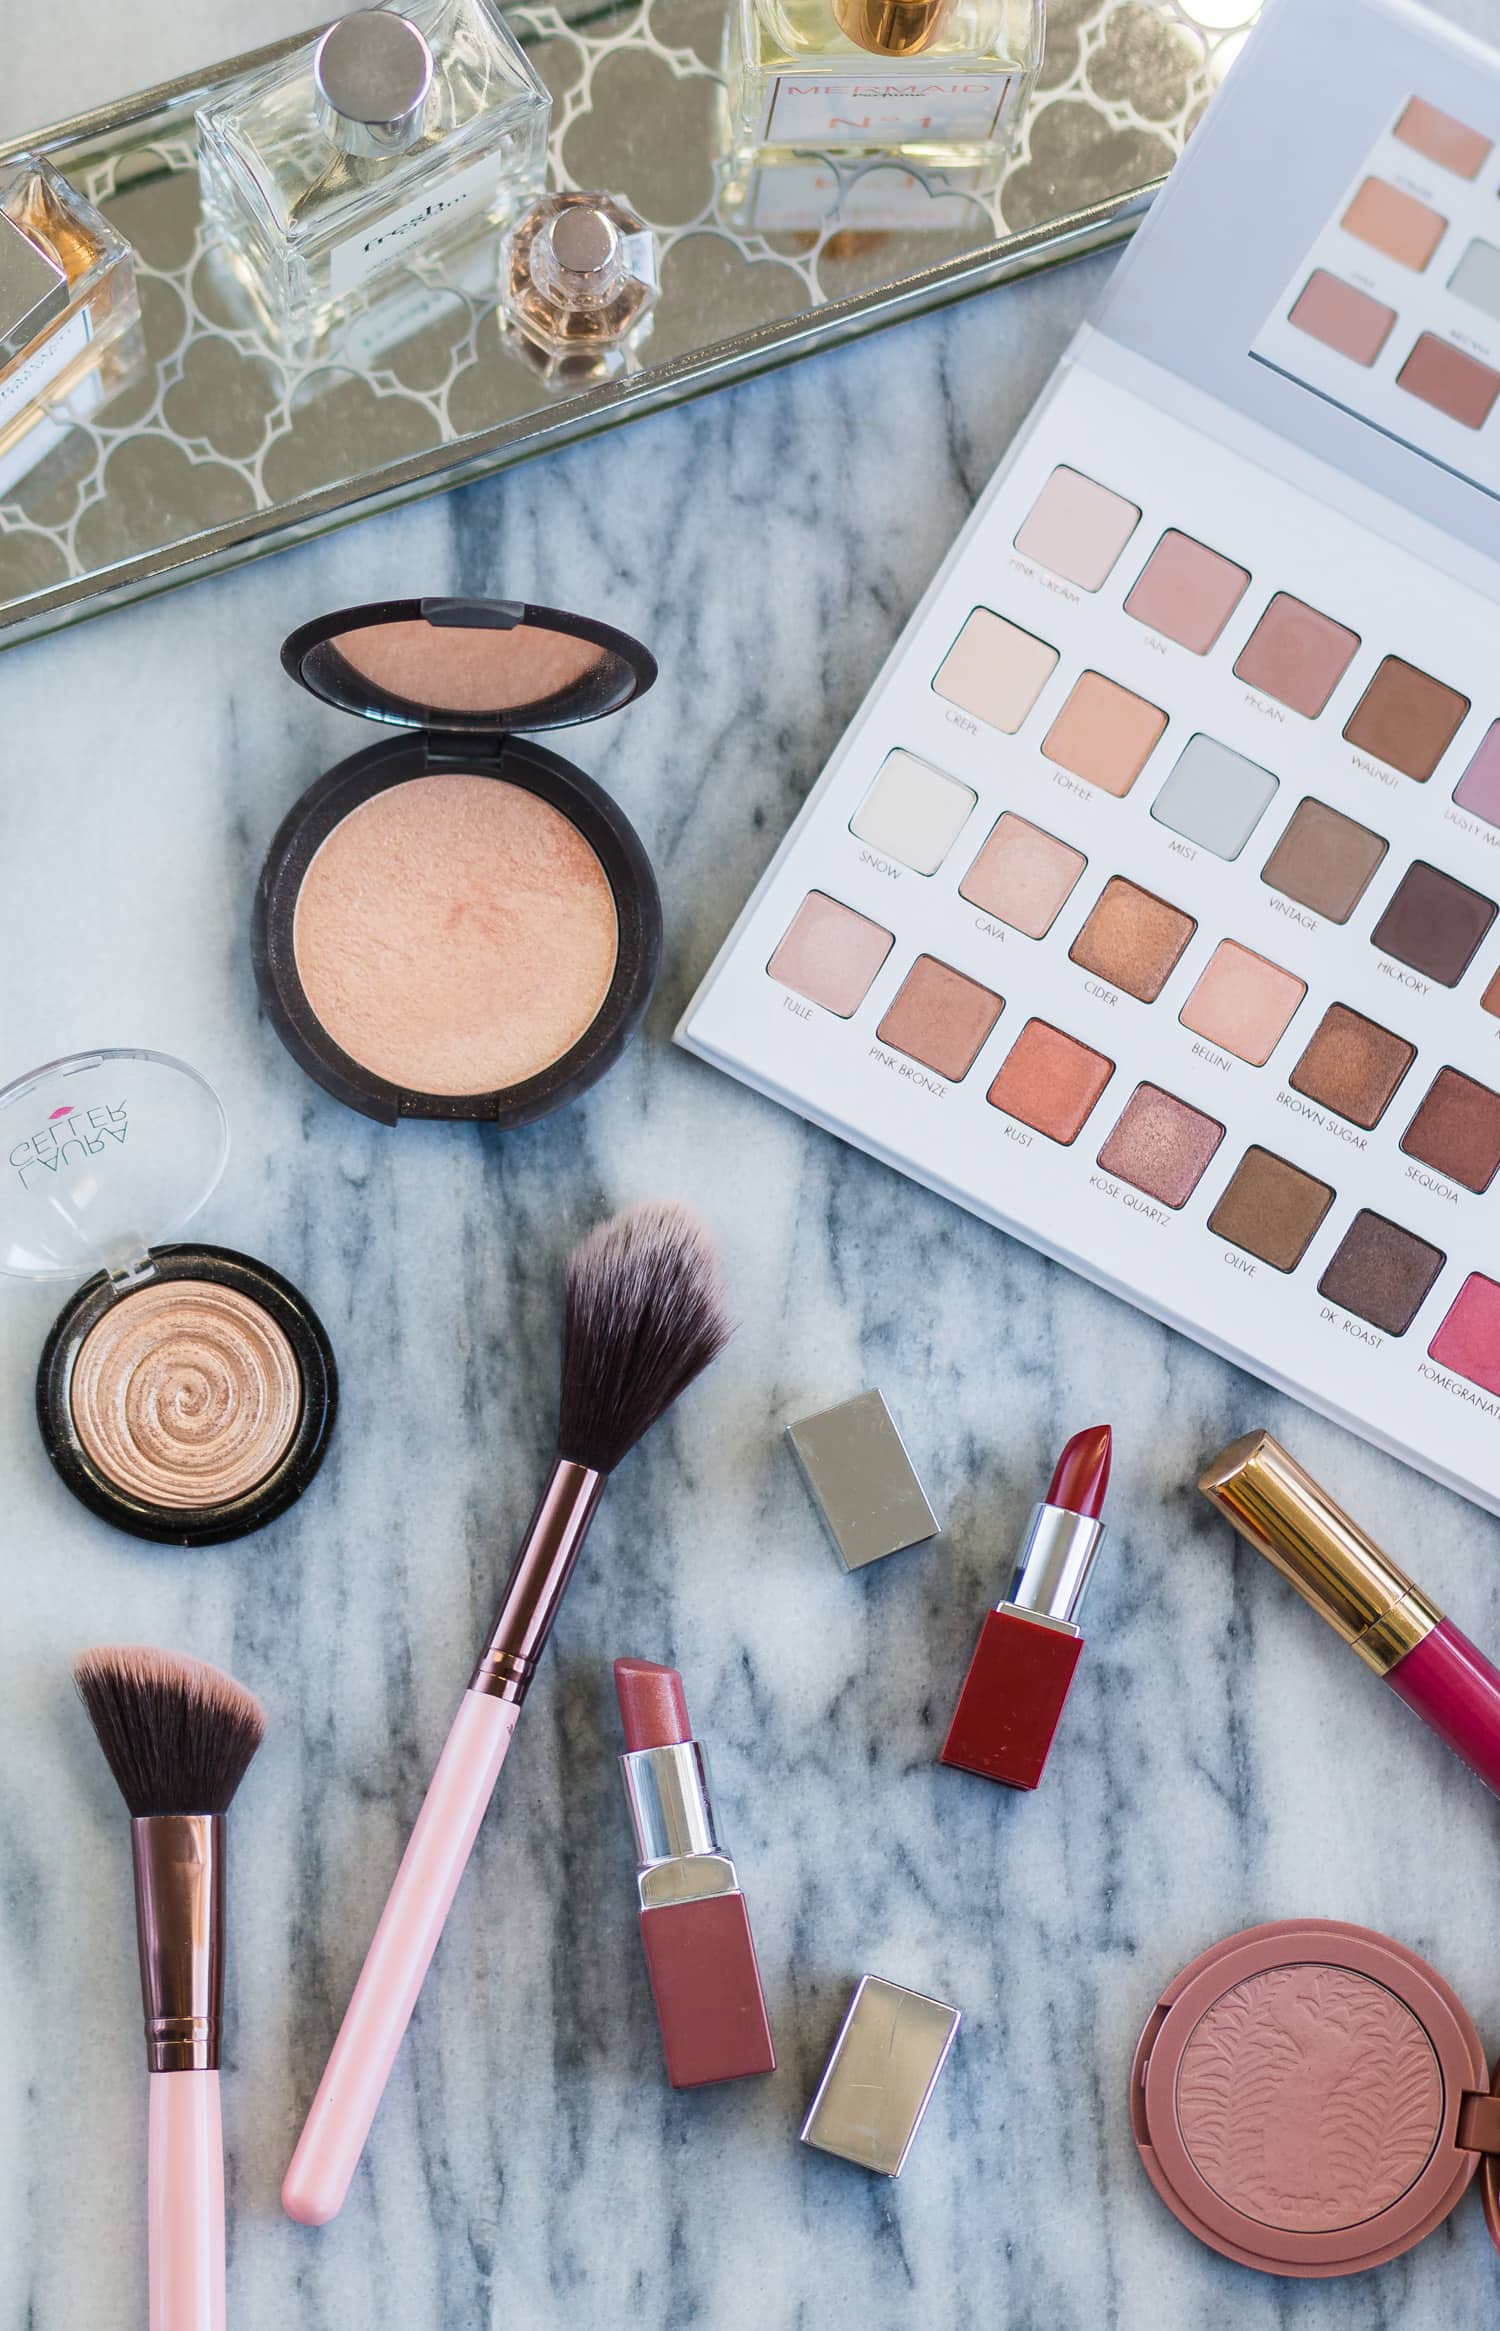 how-to-update-your-fall-makeup-routine-beauty-blogger-ashley-brooke-nicholas-9522